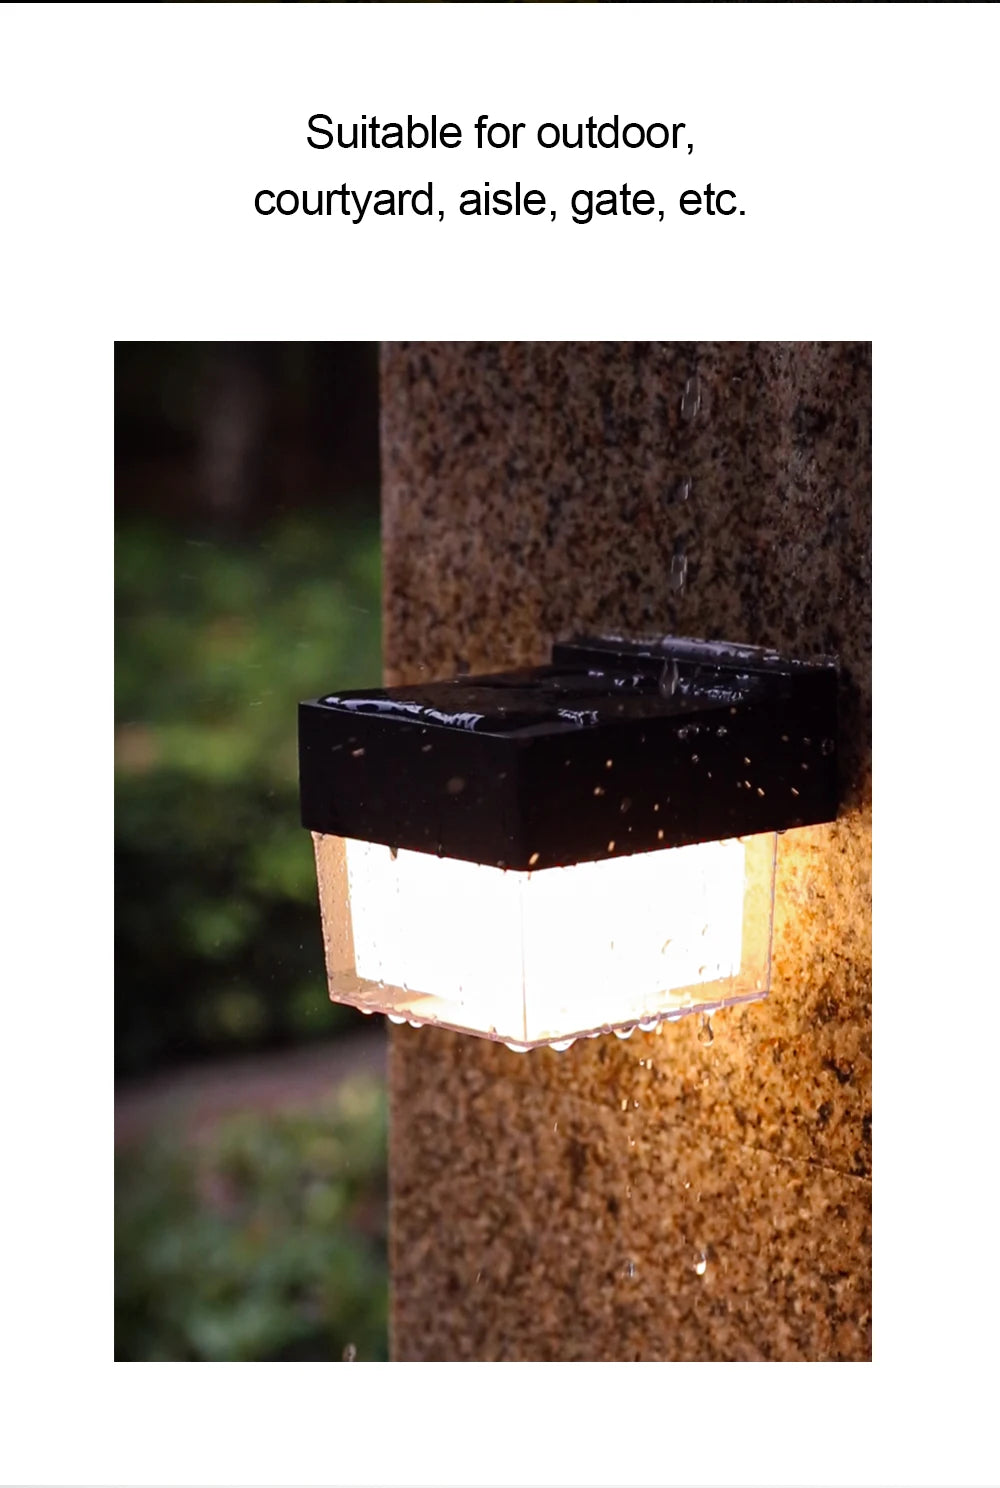 IP65 Waterproof Interior Wall Light, Perfect for outdoor spaces, including courtyards, walkways, gates, and more.